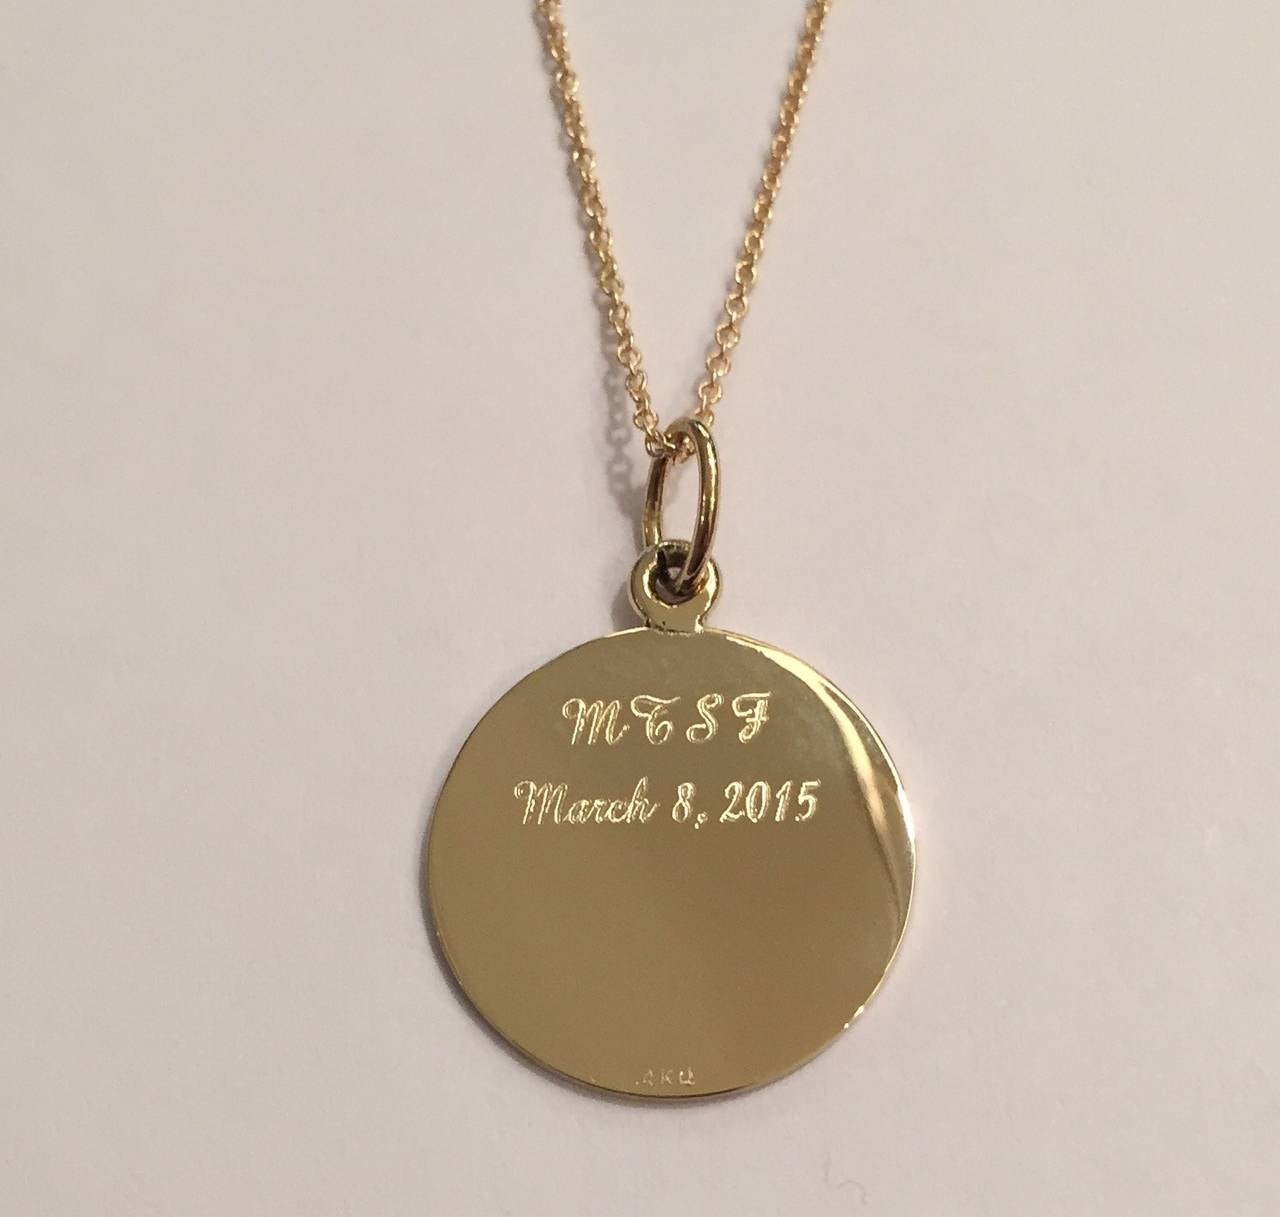 Personalized 14kt Gold First Communion Pendant Necklace.

Gold circle pendant laser inscribed with your Church/School Logo and then engraved with your child's initials, or monogram and Date of the First Communion or Confirmation.

The Pendant is